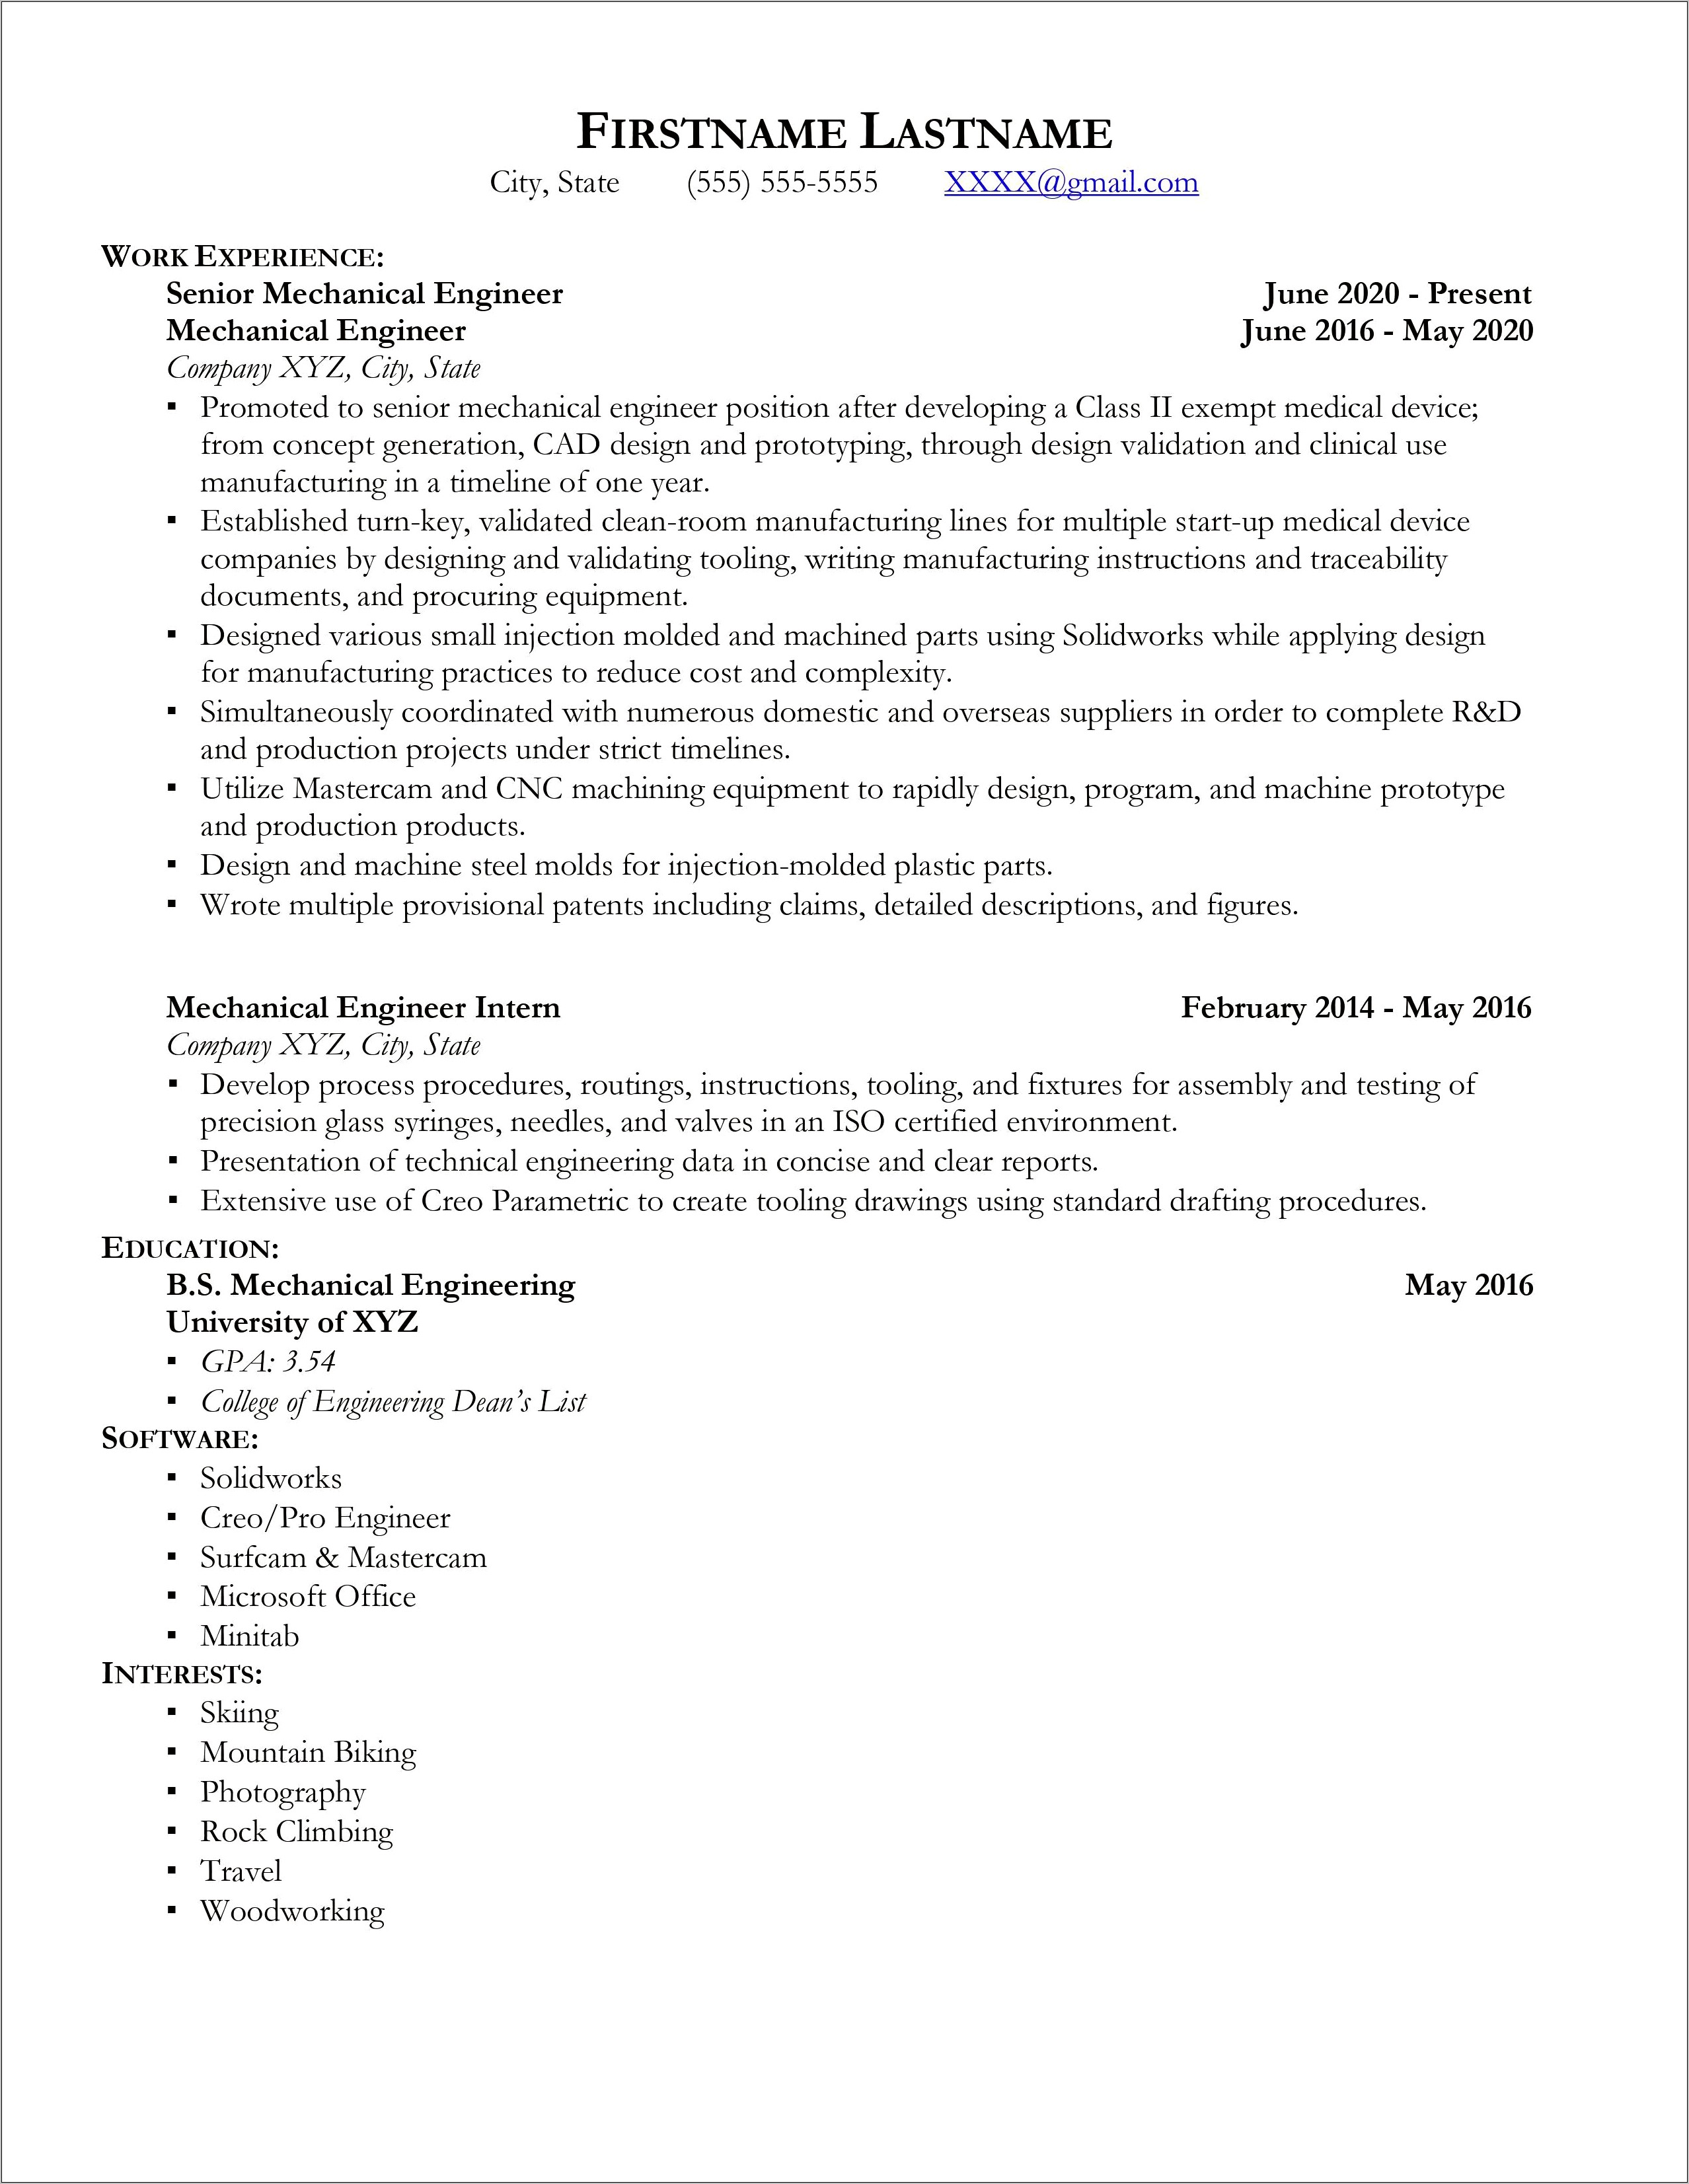 Resume Looking For Second Job